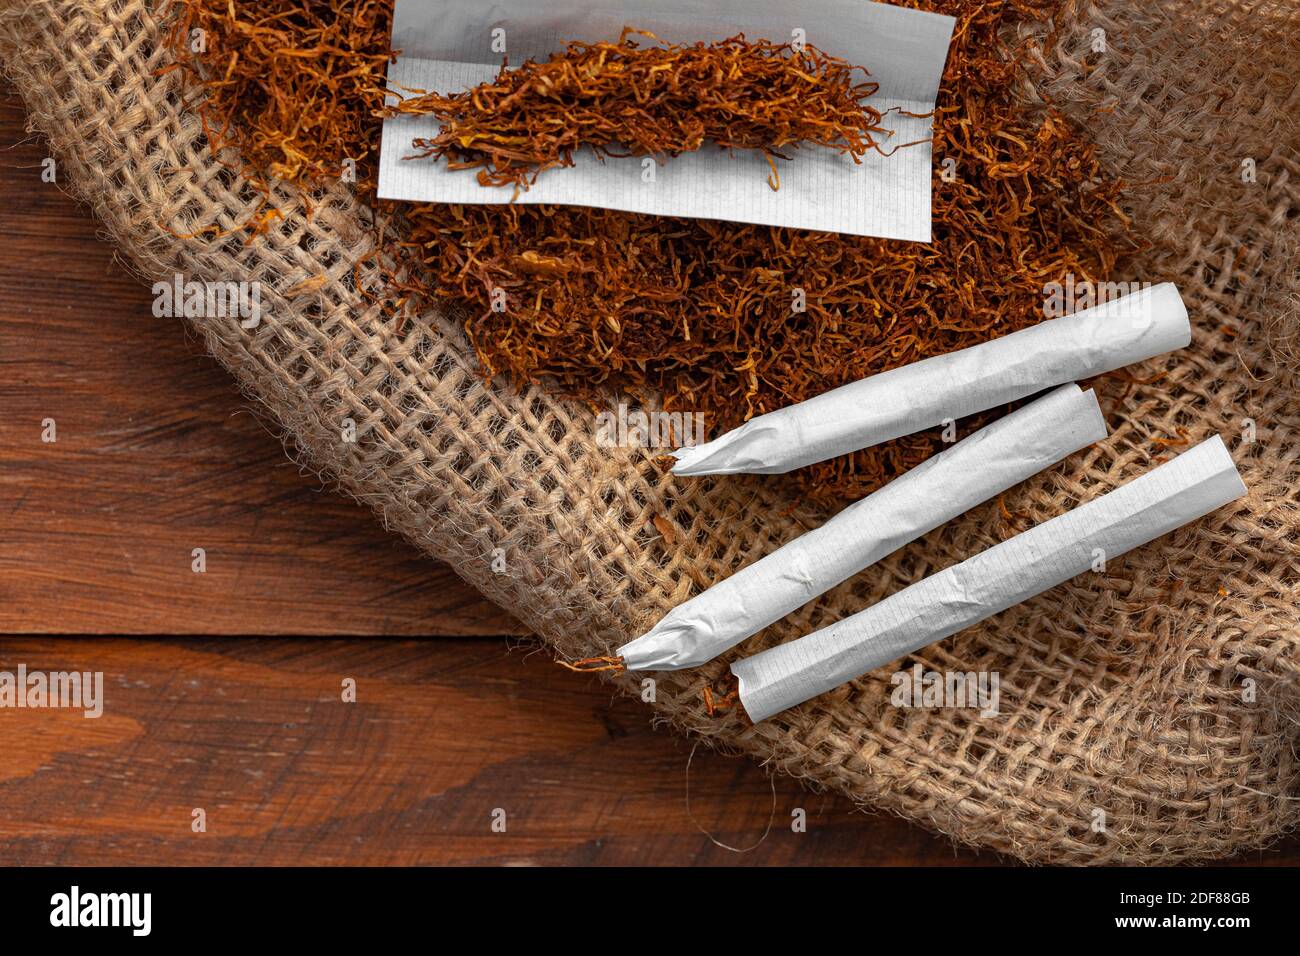 https://c8.alamy.com/comp/2DF88GB/cigarette-paper-and-pile-of-tobacco-on-wooden-table-2DF88GB.jpg